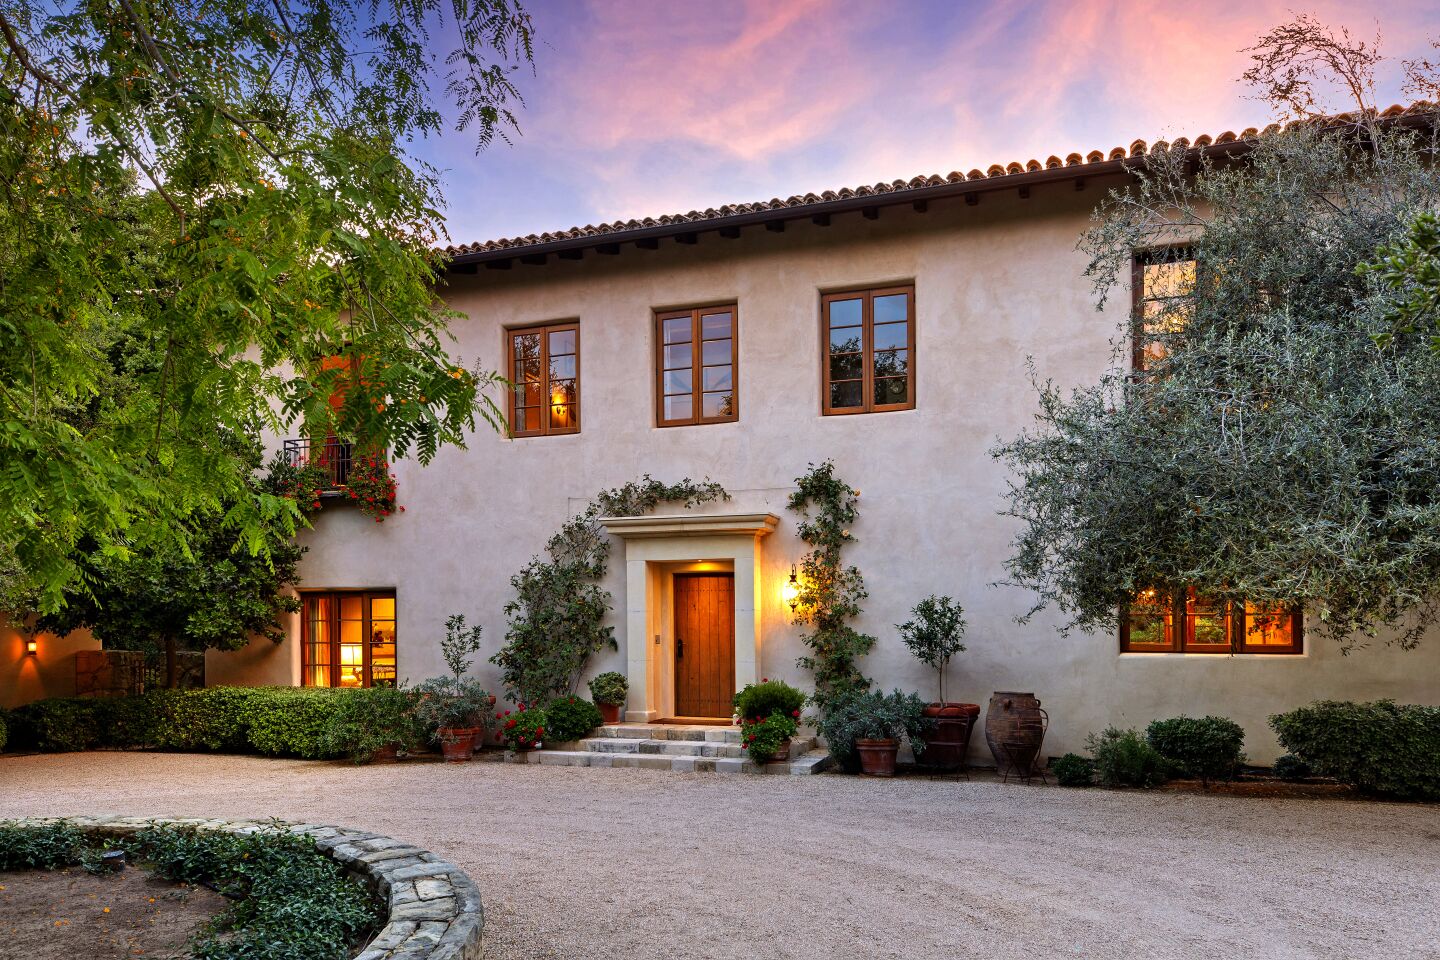 The exterior of a Mediterranean-style home in Montecito